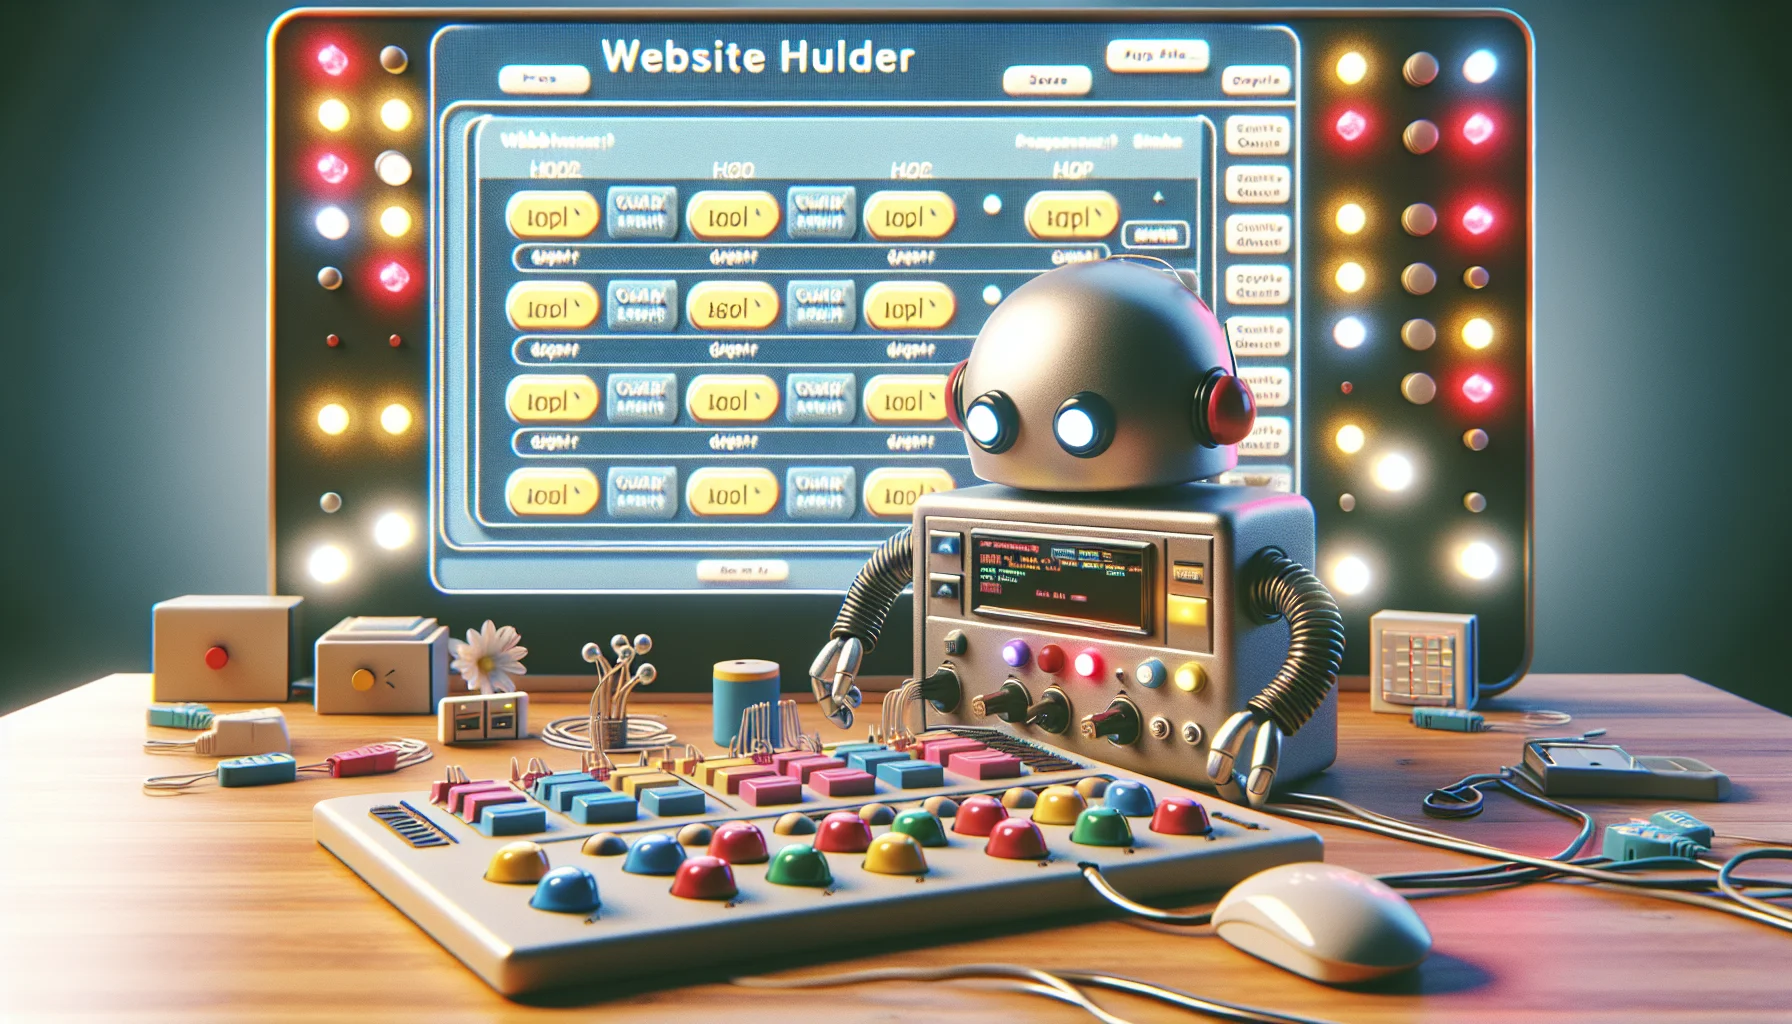 Create a humorous, intriguing image illustrating a web hosting scenario. Visualize a generic website builder platform, resembling early 2000's website designs, with an approachable, friendly robot as the assistant. Let the robot sport a quirky expression while hovering over the control panel, full of colorful buttons and switches, tweaking the website settings. In the background, maybe show light clusters representing data transfer. Remember to capture the fun, yet professional ambience and a few elements nodding towards craft, possibly handmade items dotted around the work area, referencing the spirit of DIY businesses.